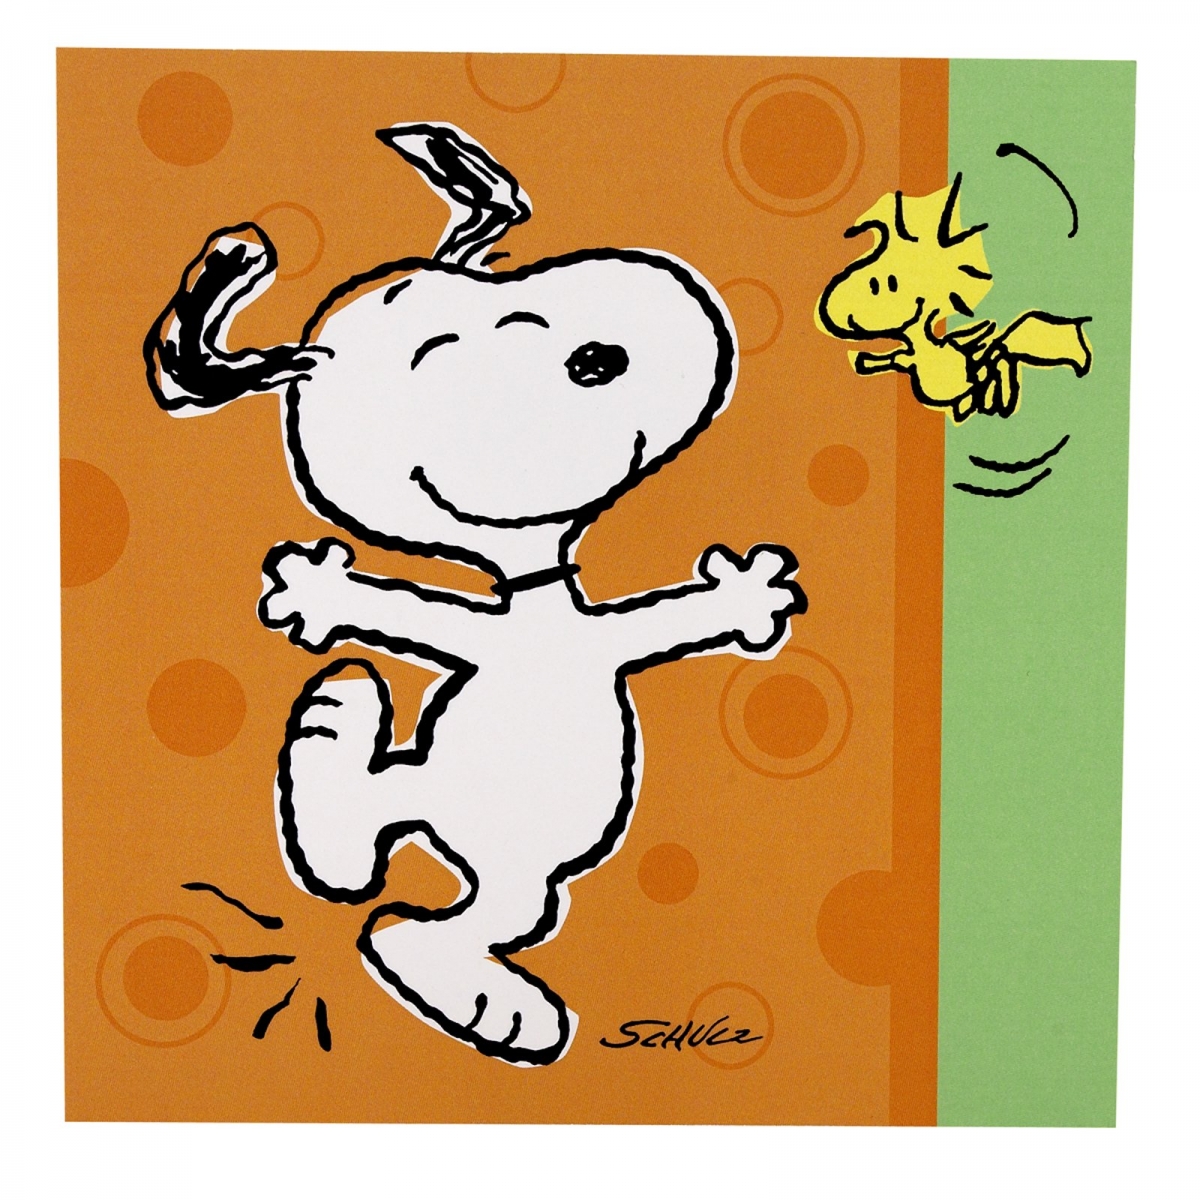 snoopy-happy-saturday-images-viewing-gallery-4UF5mH-clipart.jpg